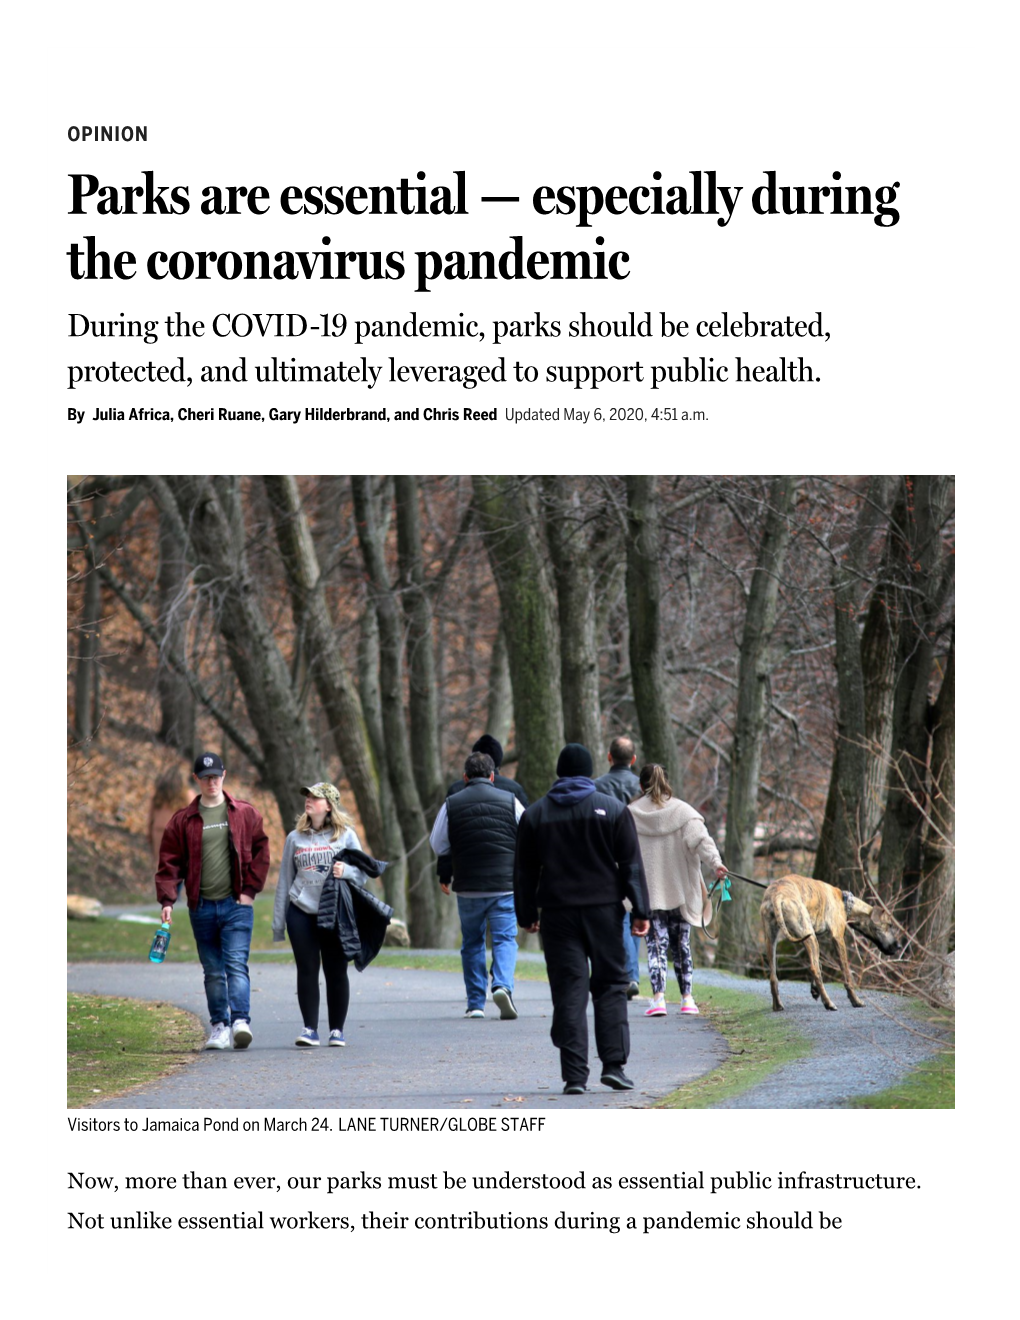 Parks Are Essential — Especially During the Coronavirus Pandemic